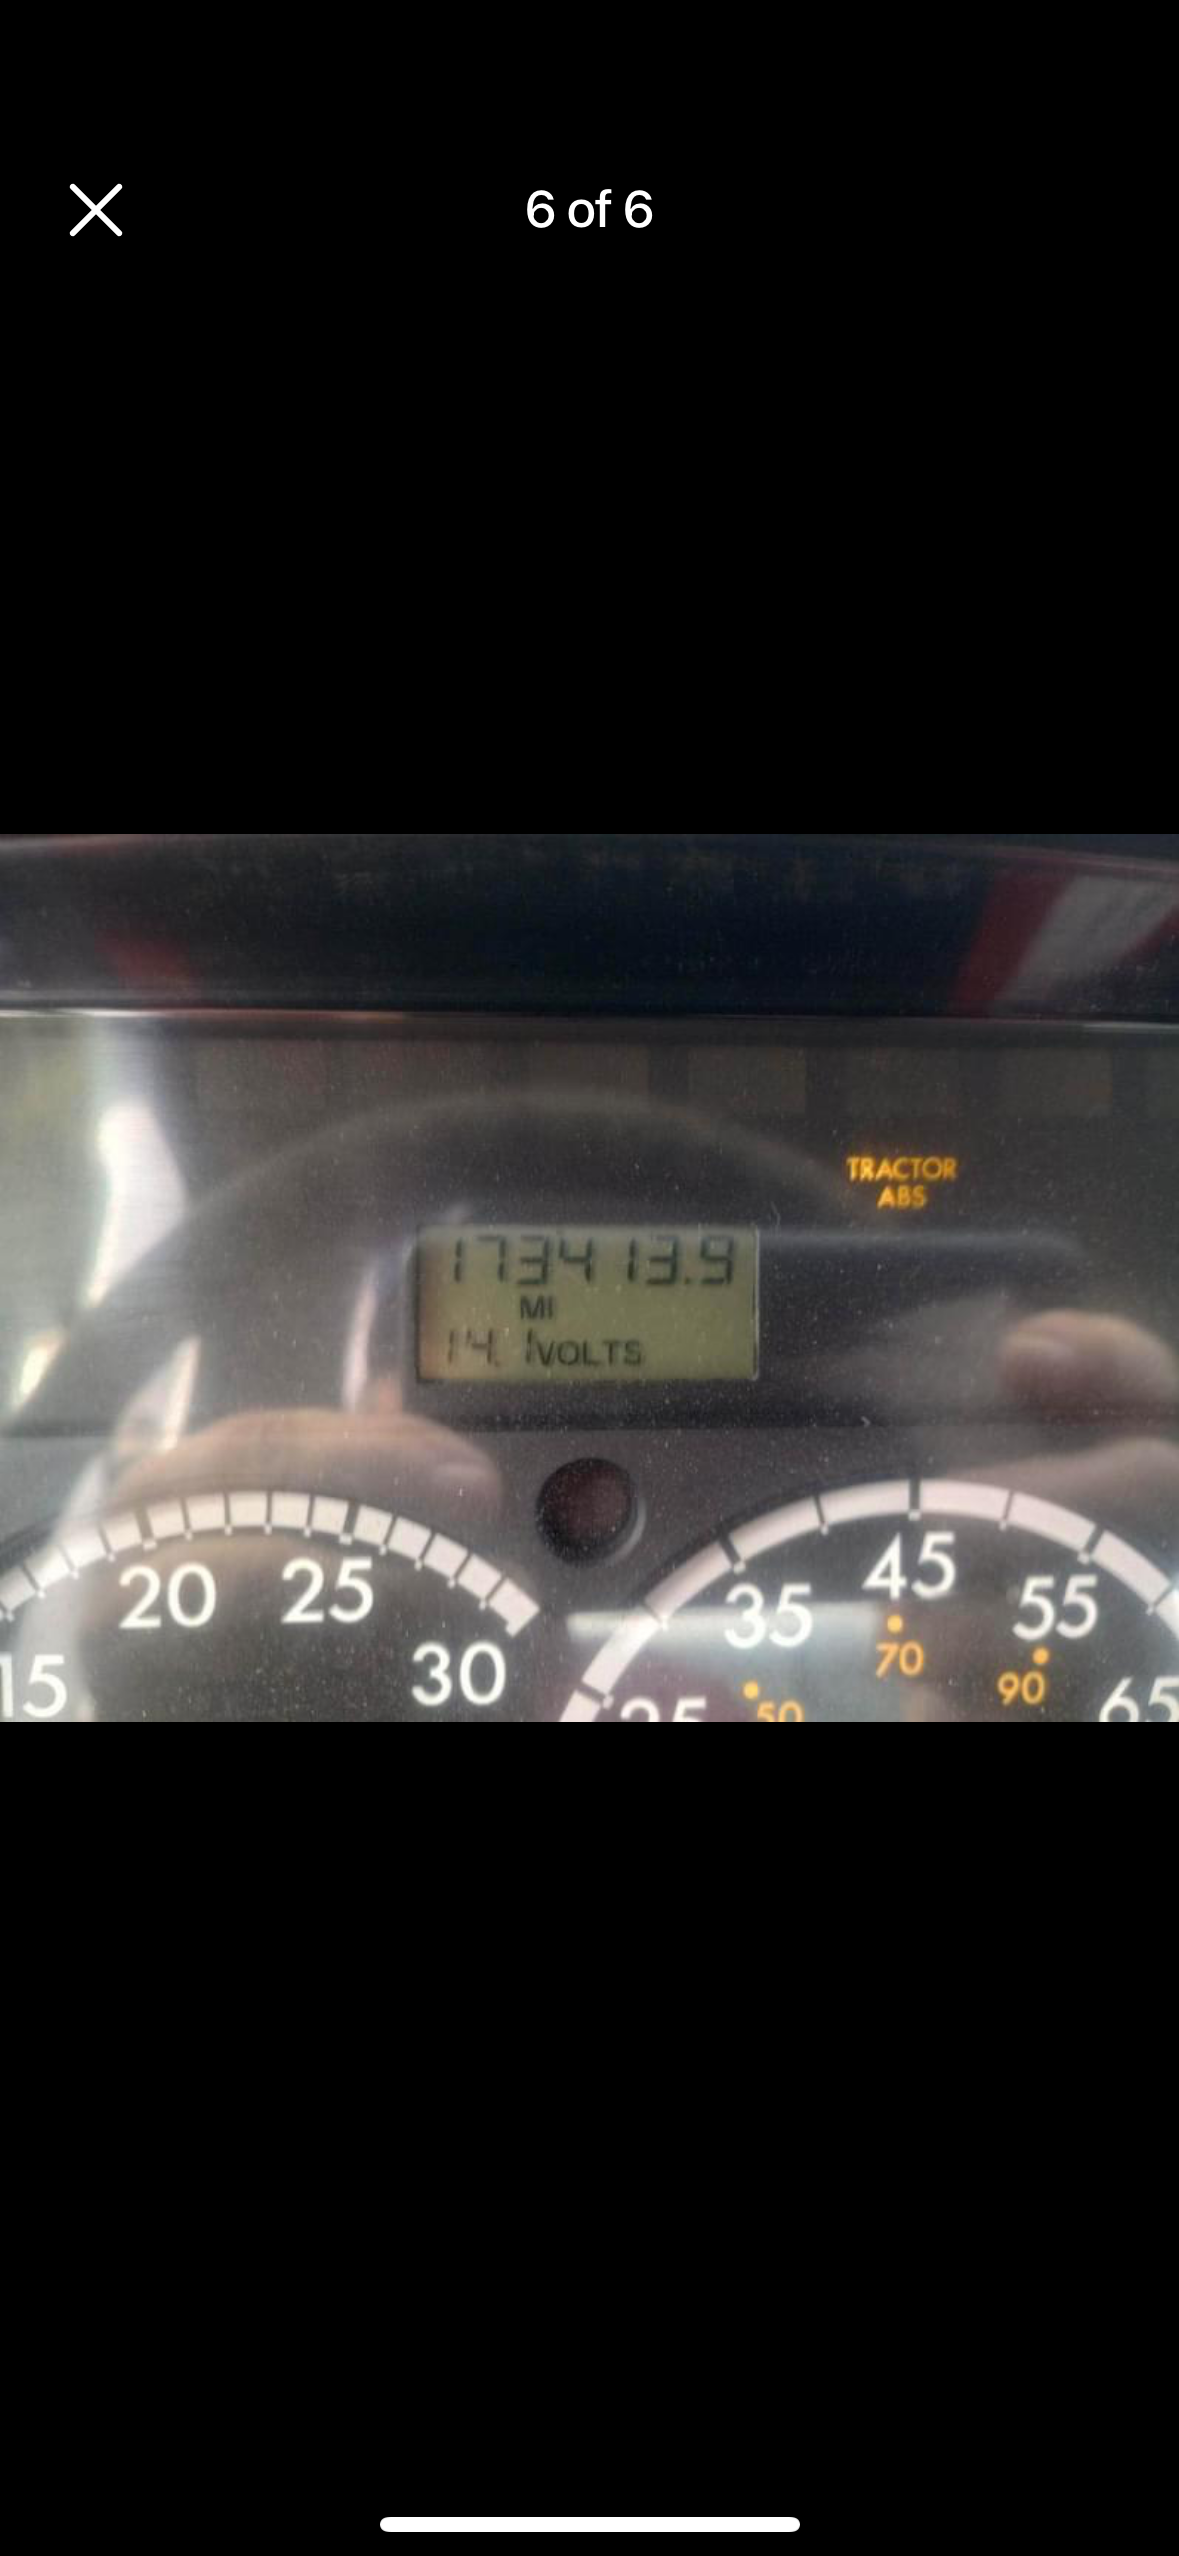 A person is driving a car and the speedometer shows that they are going very fast.